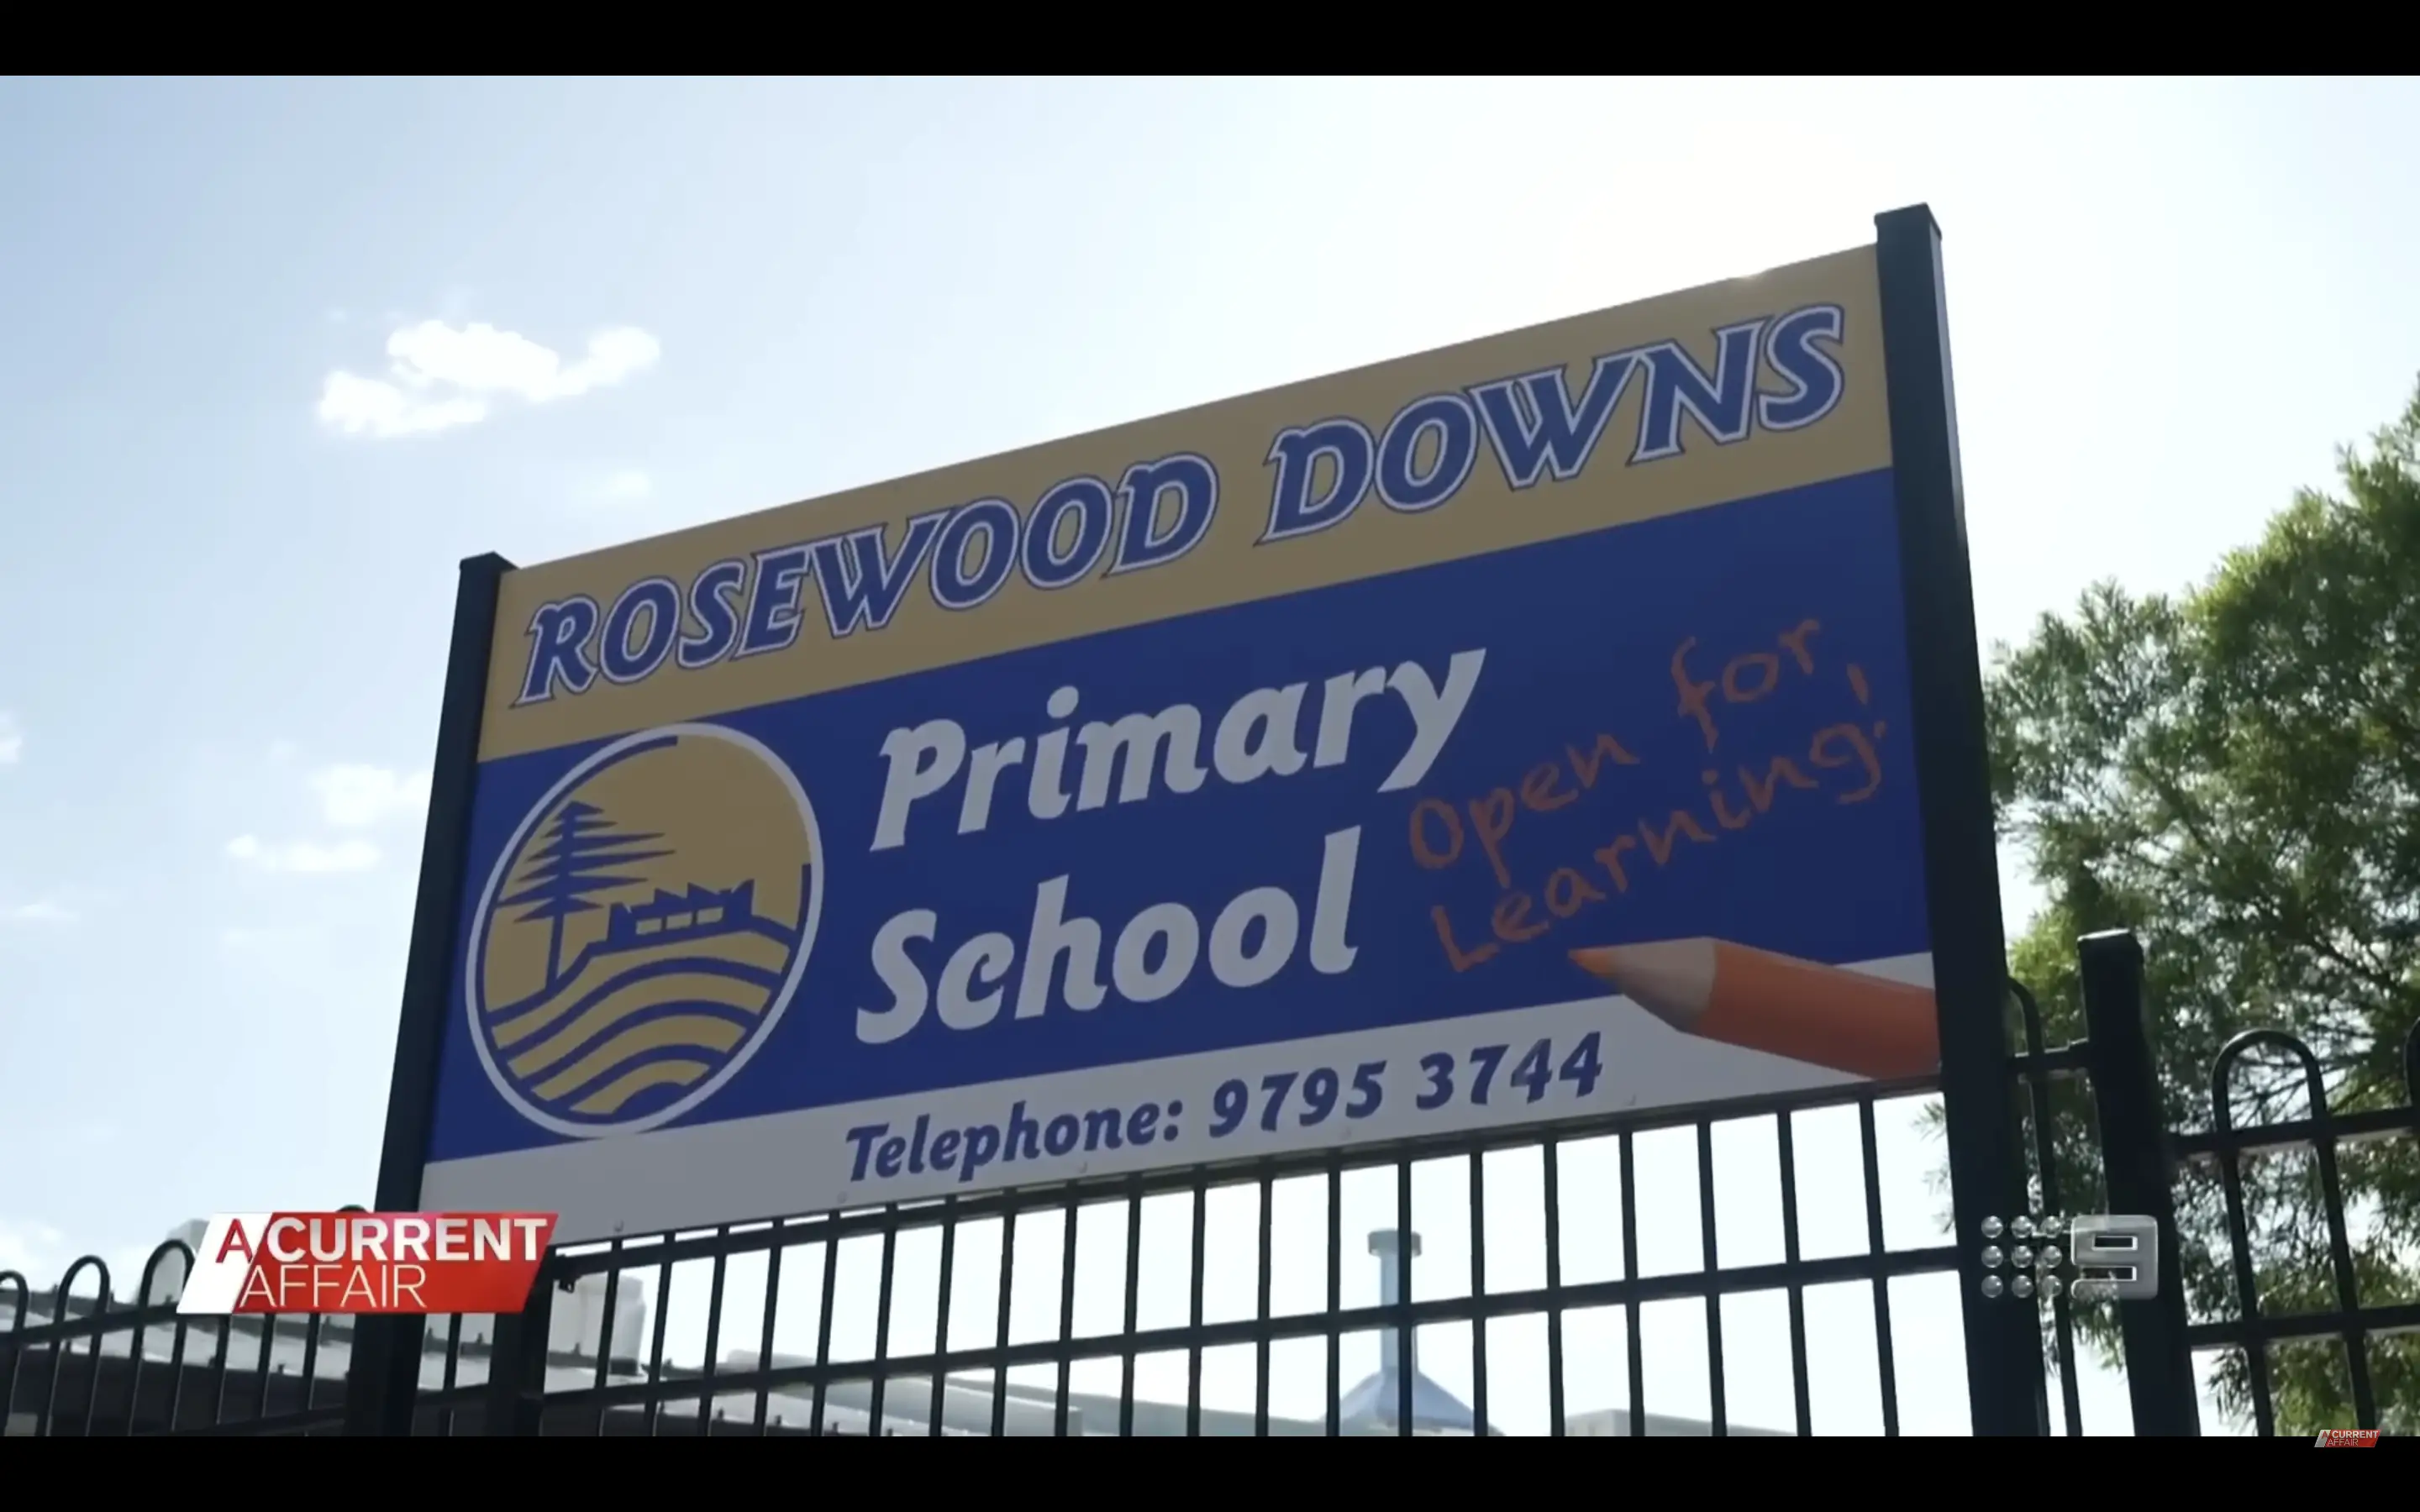 A Rosewood Downs Primary School sign. │Source: youtube.com/A Current Affair